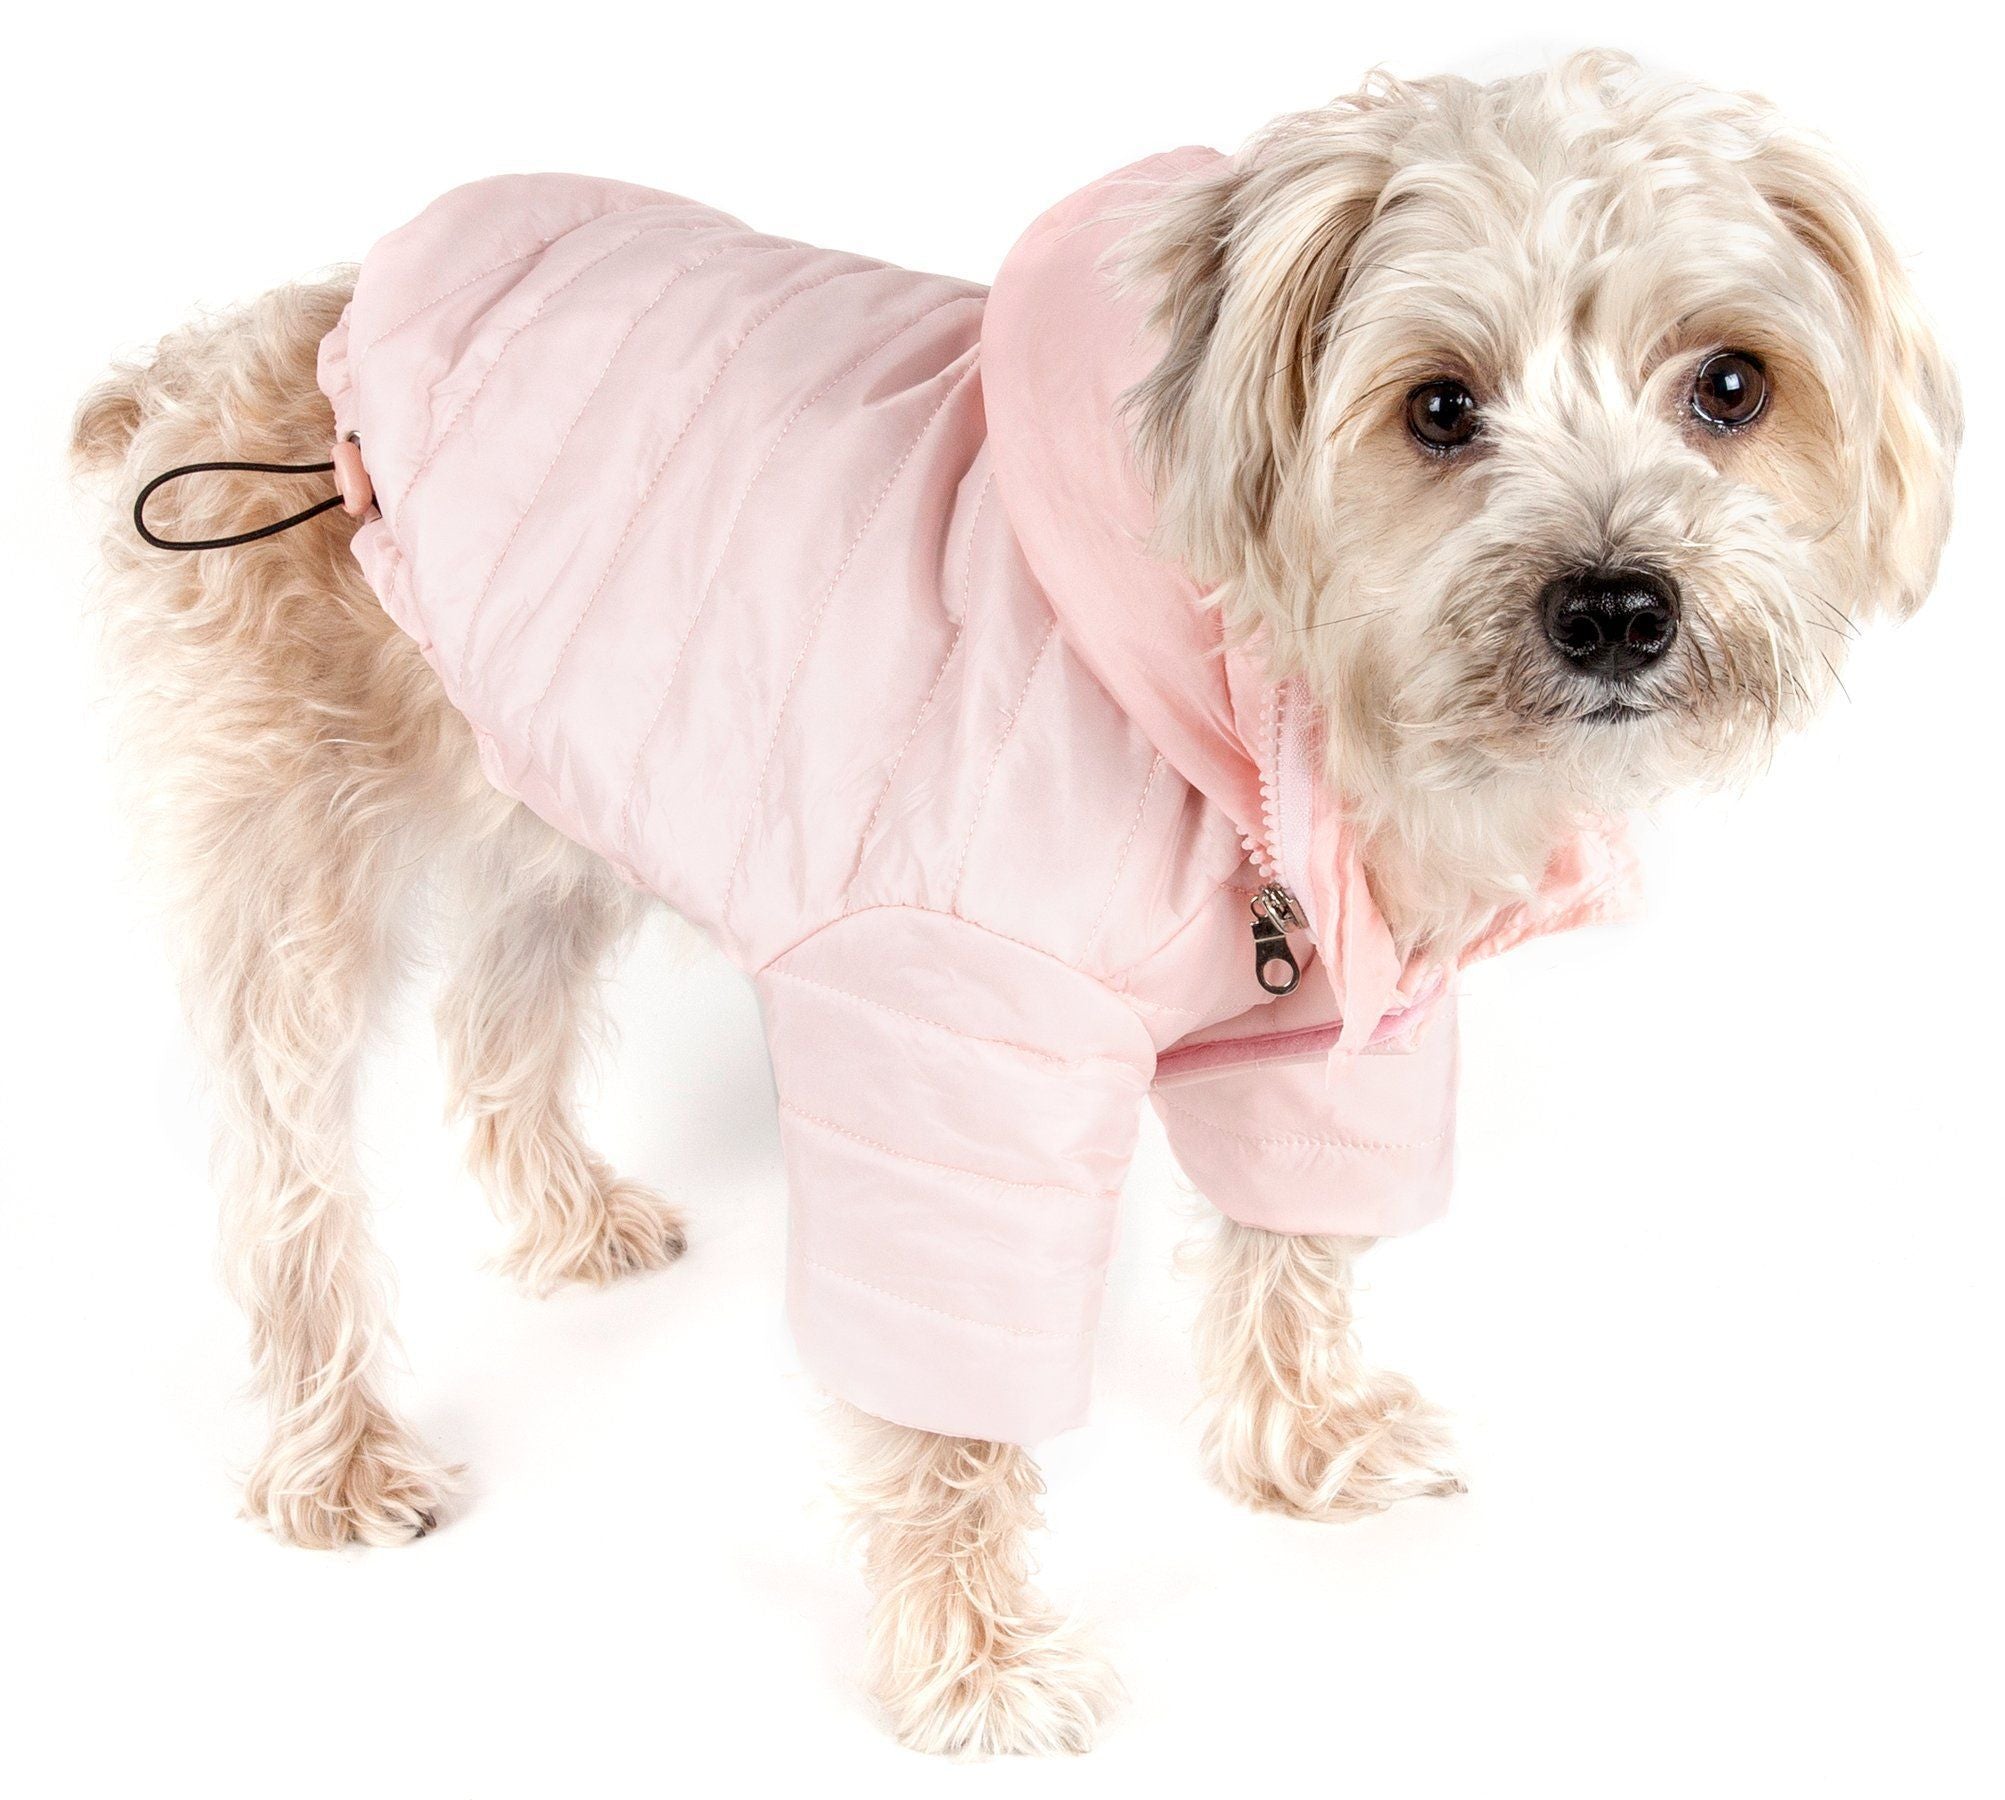 Pet Life ® Lightweight Adjustable and Collapsible 'Sporty Avalanche' Dog Coat w/ Pop-out Zippered Hood X-Small Light Pink